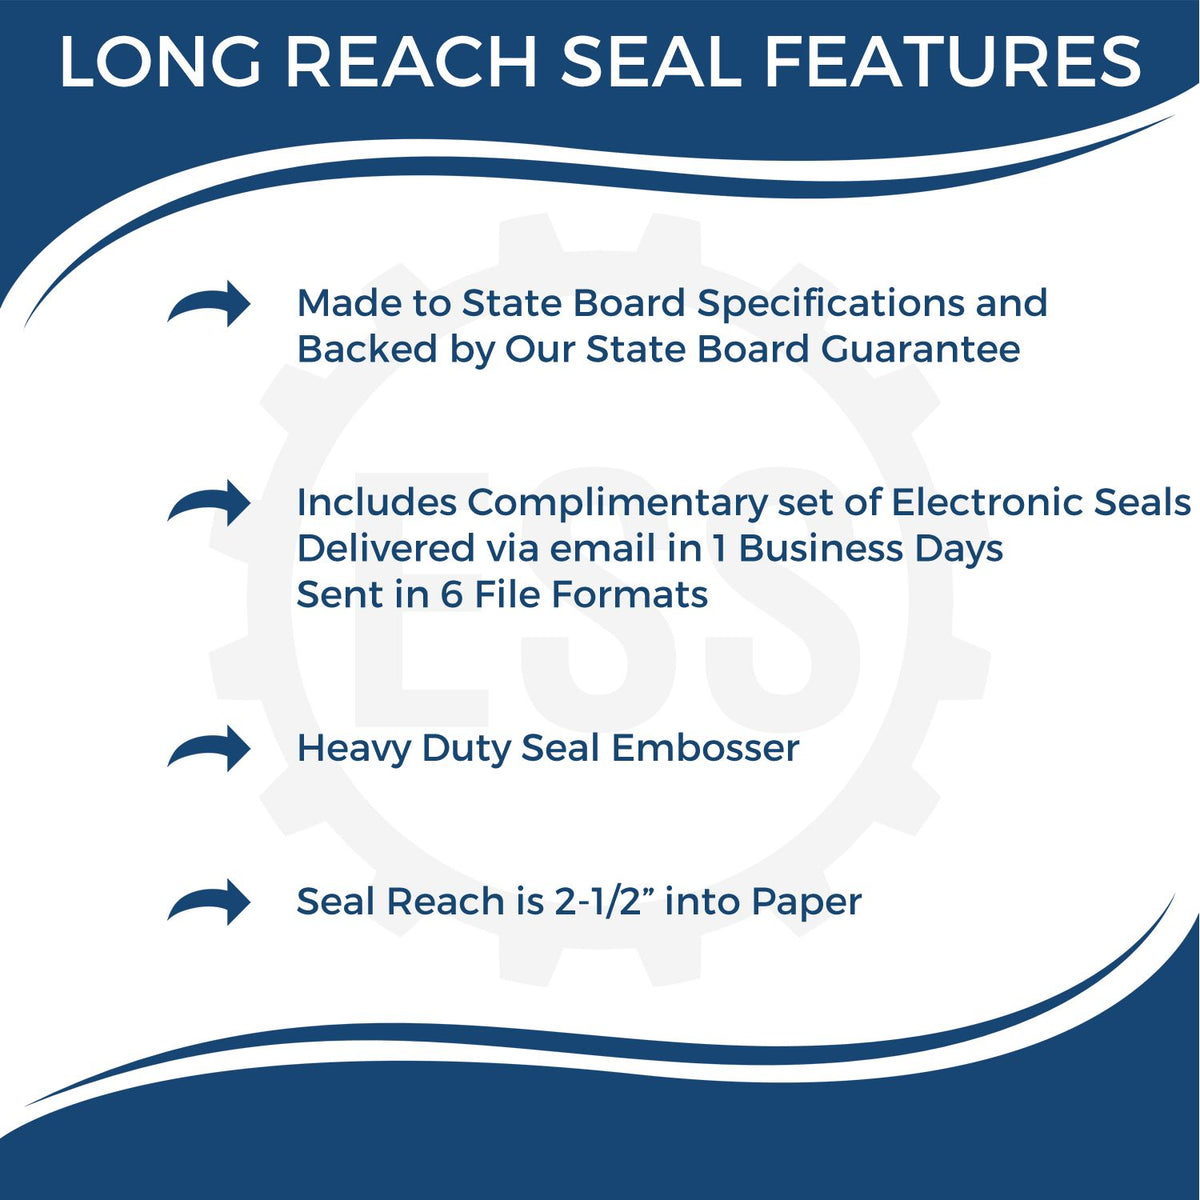 A picture of an infographic highlighting the selling points for the Long Reach New Hampshire Geology Seal